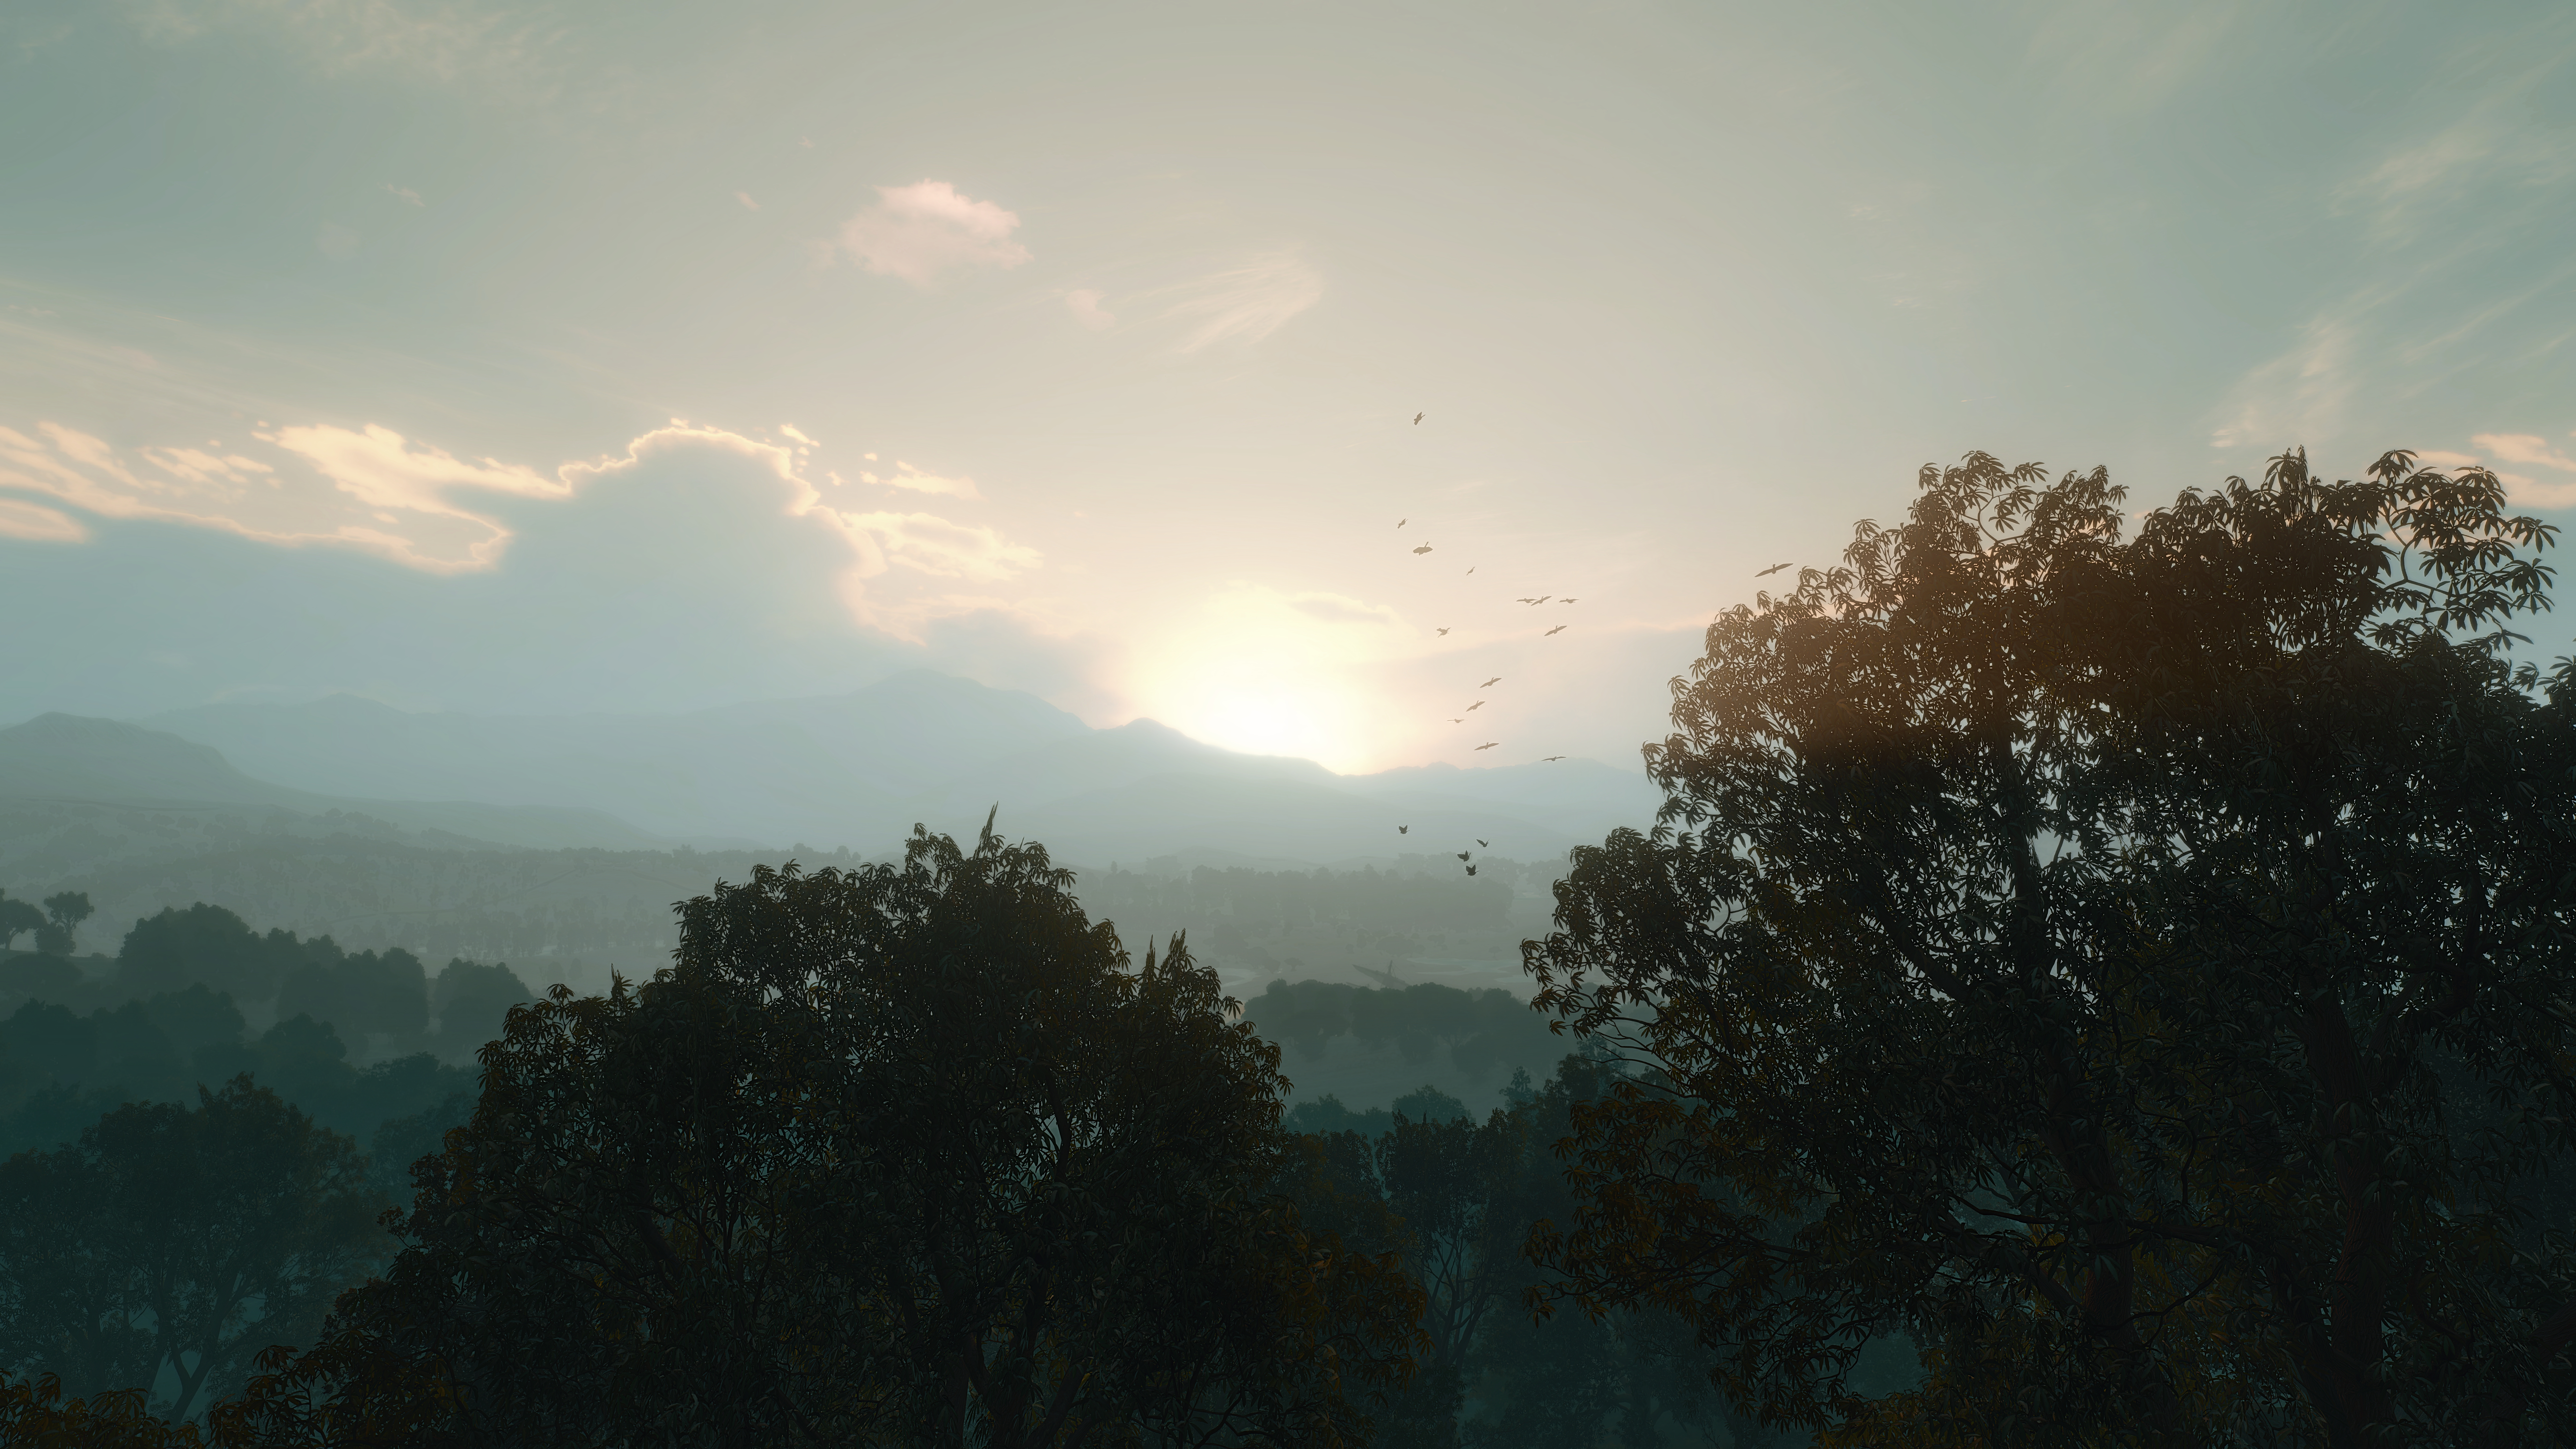 General 9600x5400 The Witcher 3: Wild Hunt trees